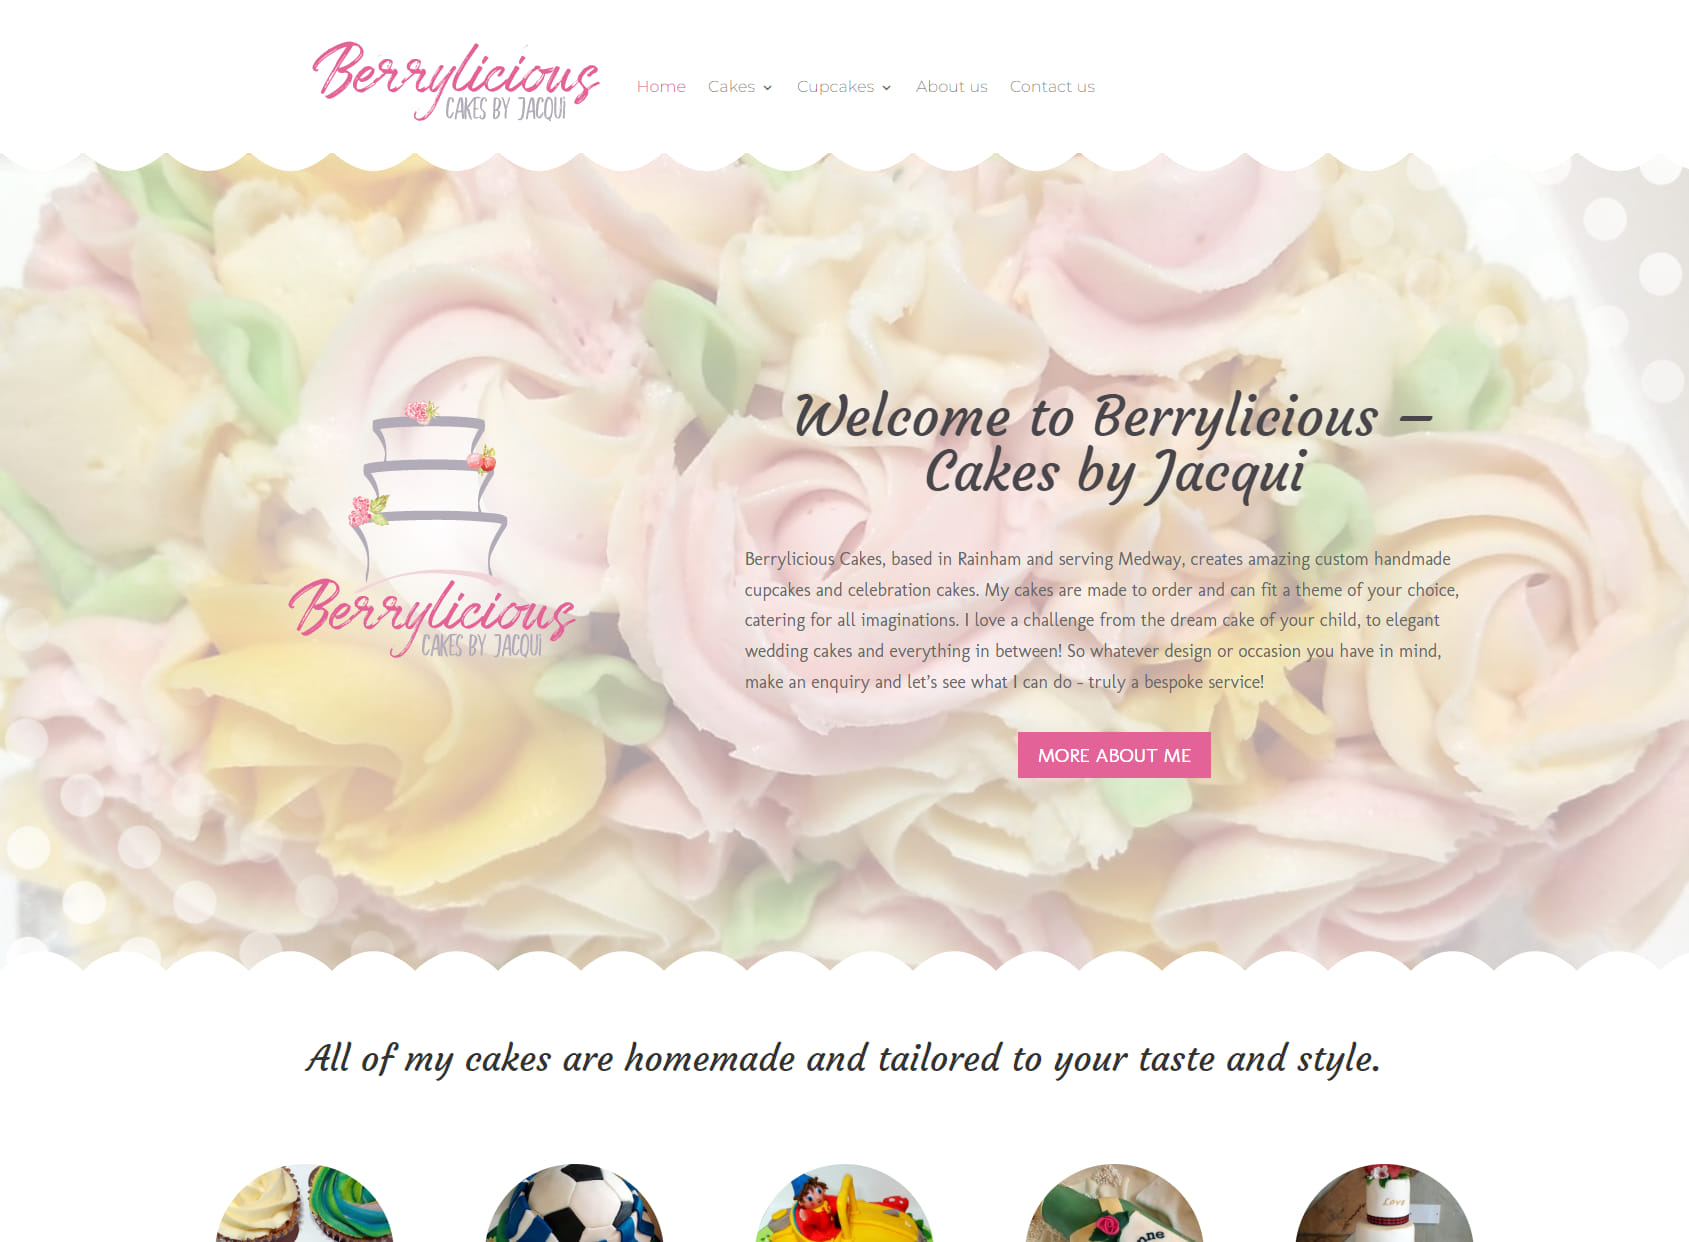 Berrylicious - Cakes by Jacqui Ltd